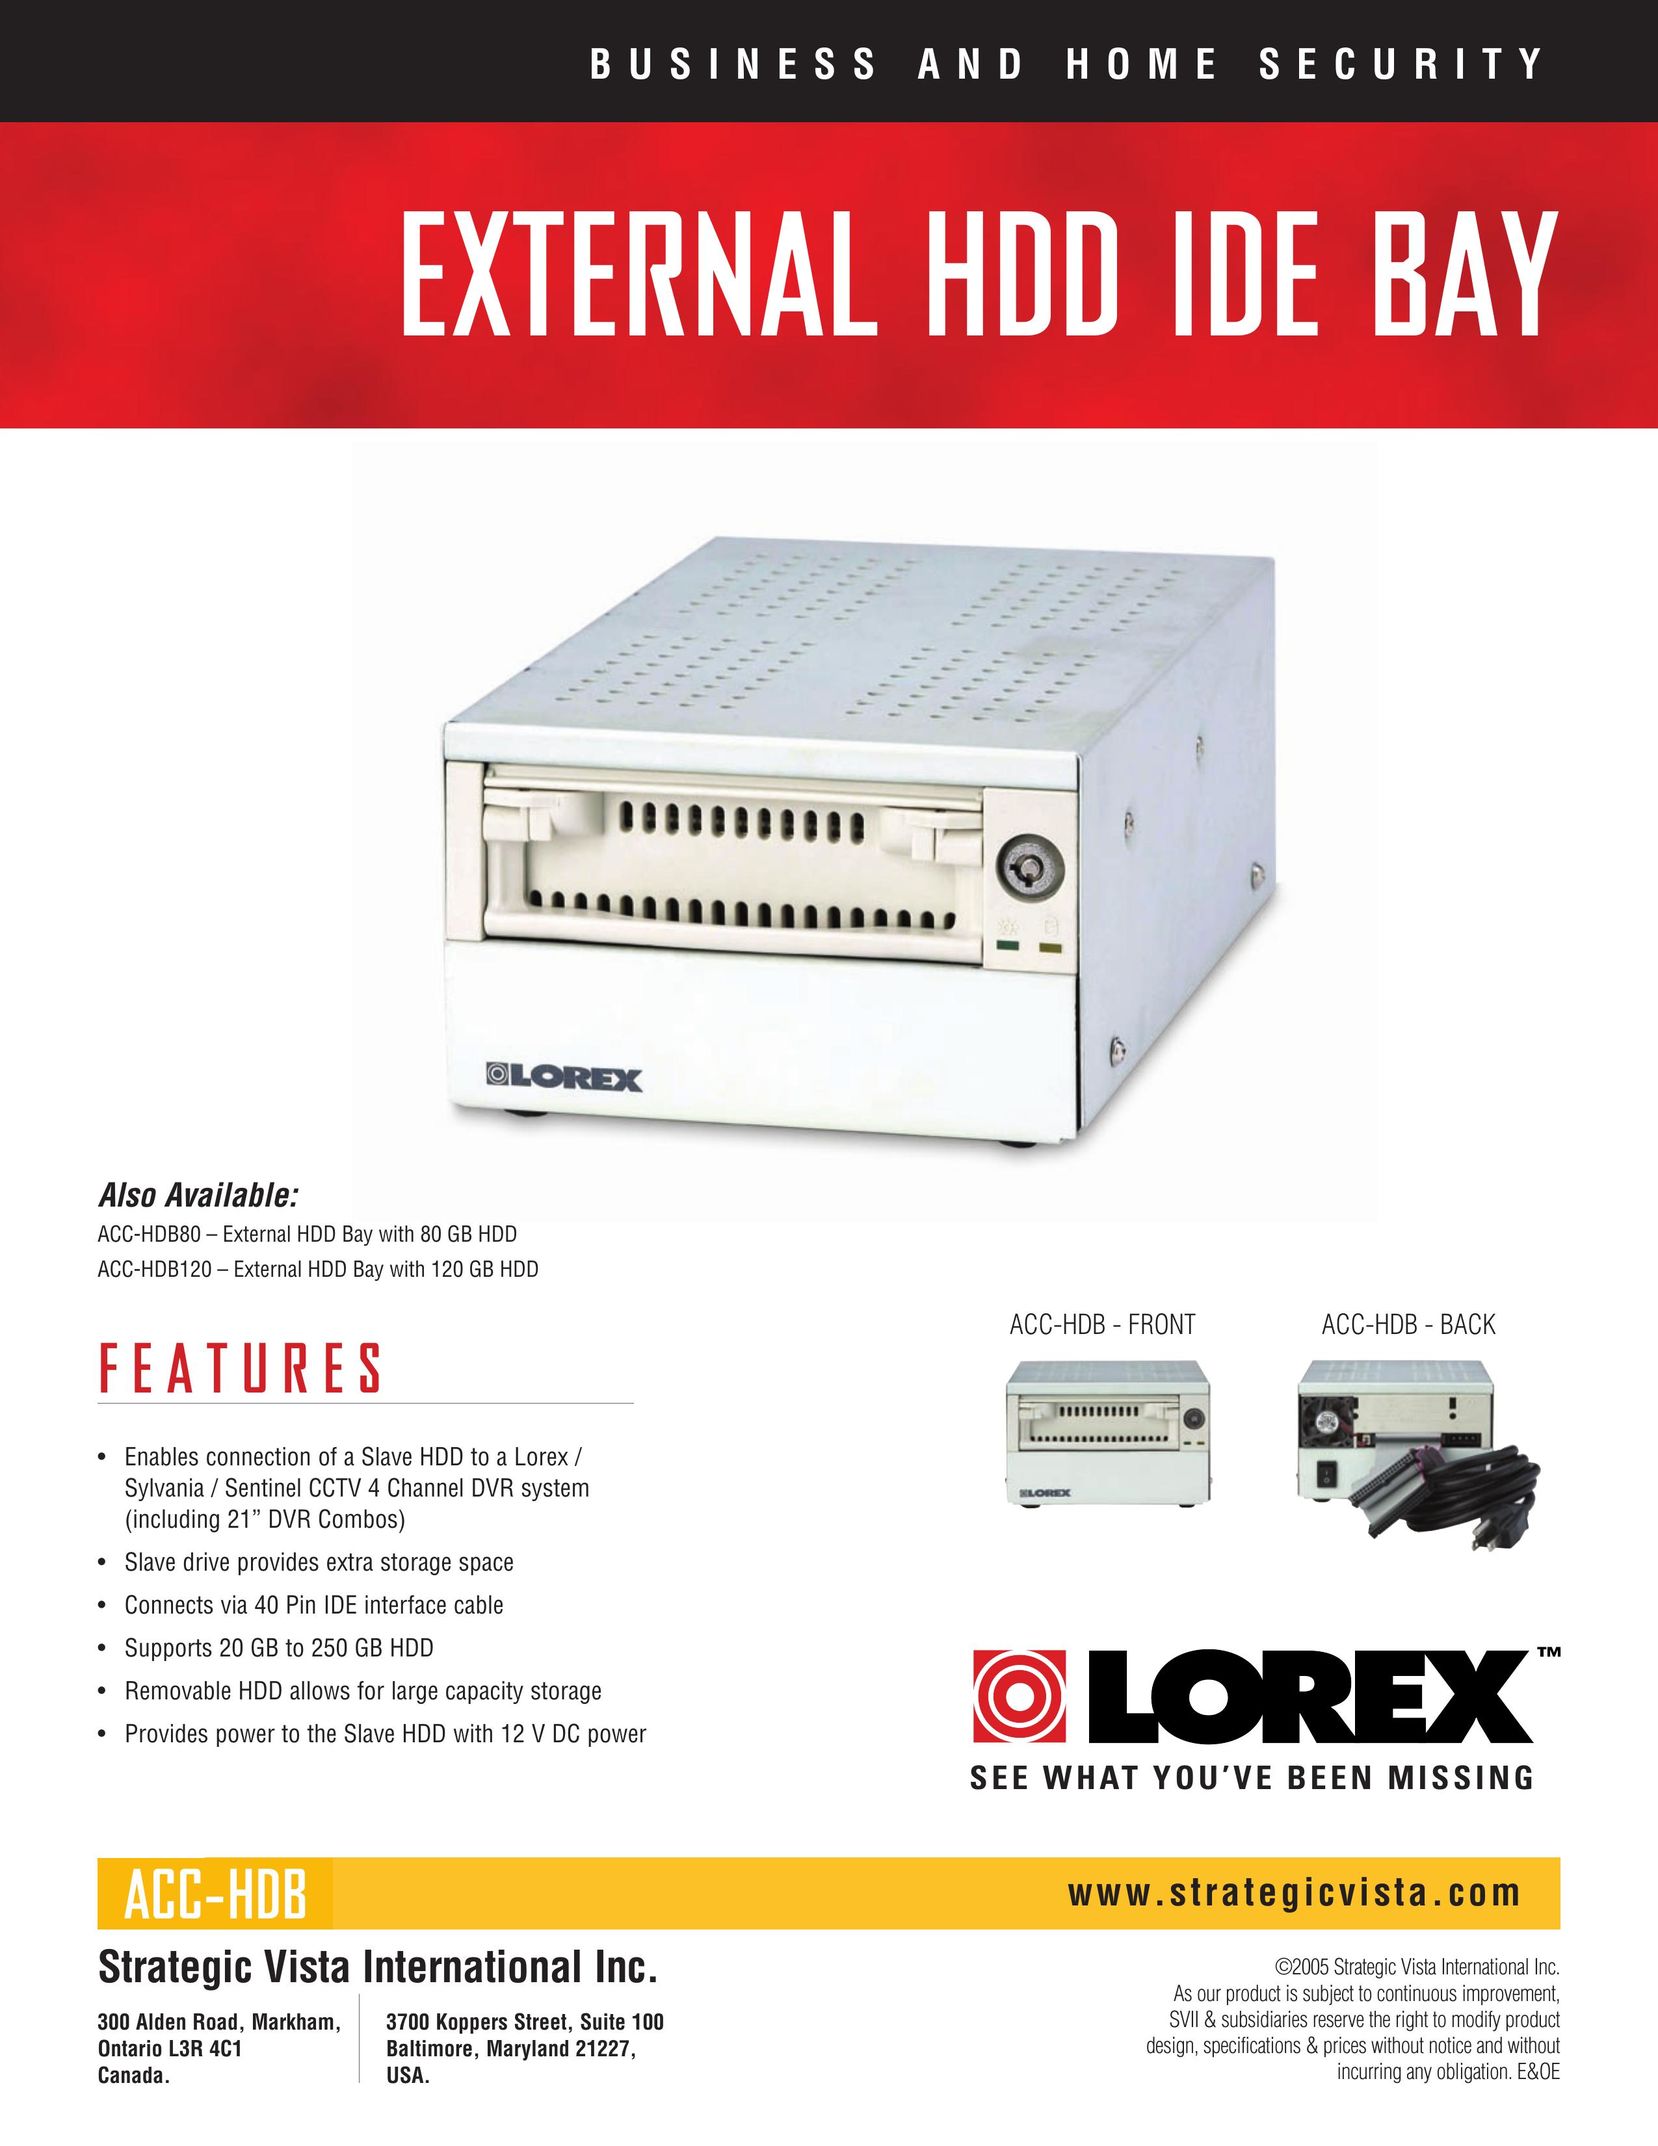 LOREX Technology ACC-HDB120 Home Security System User Manual